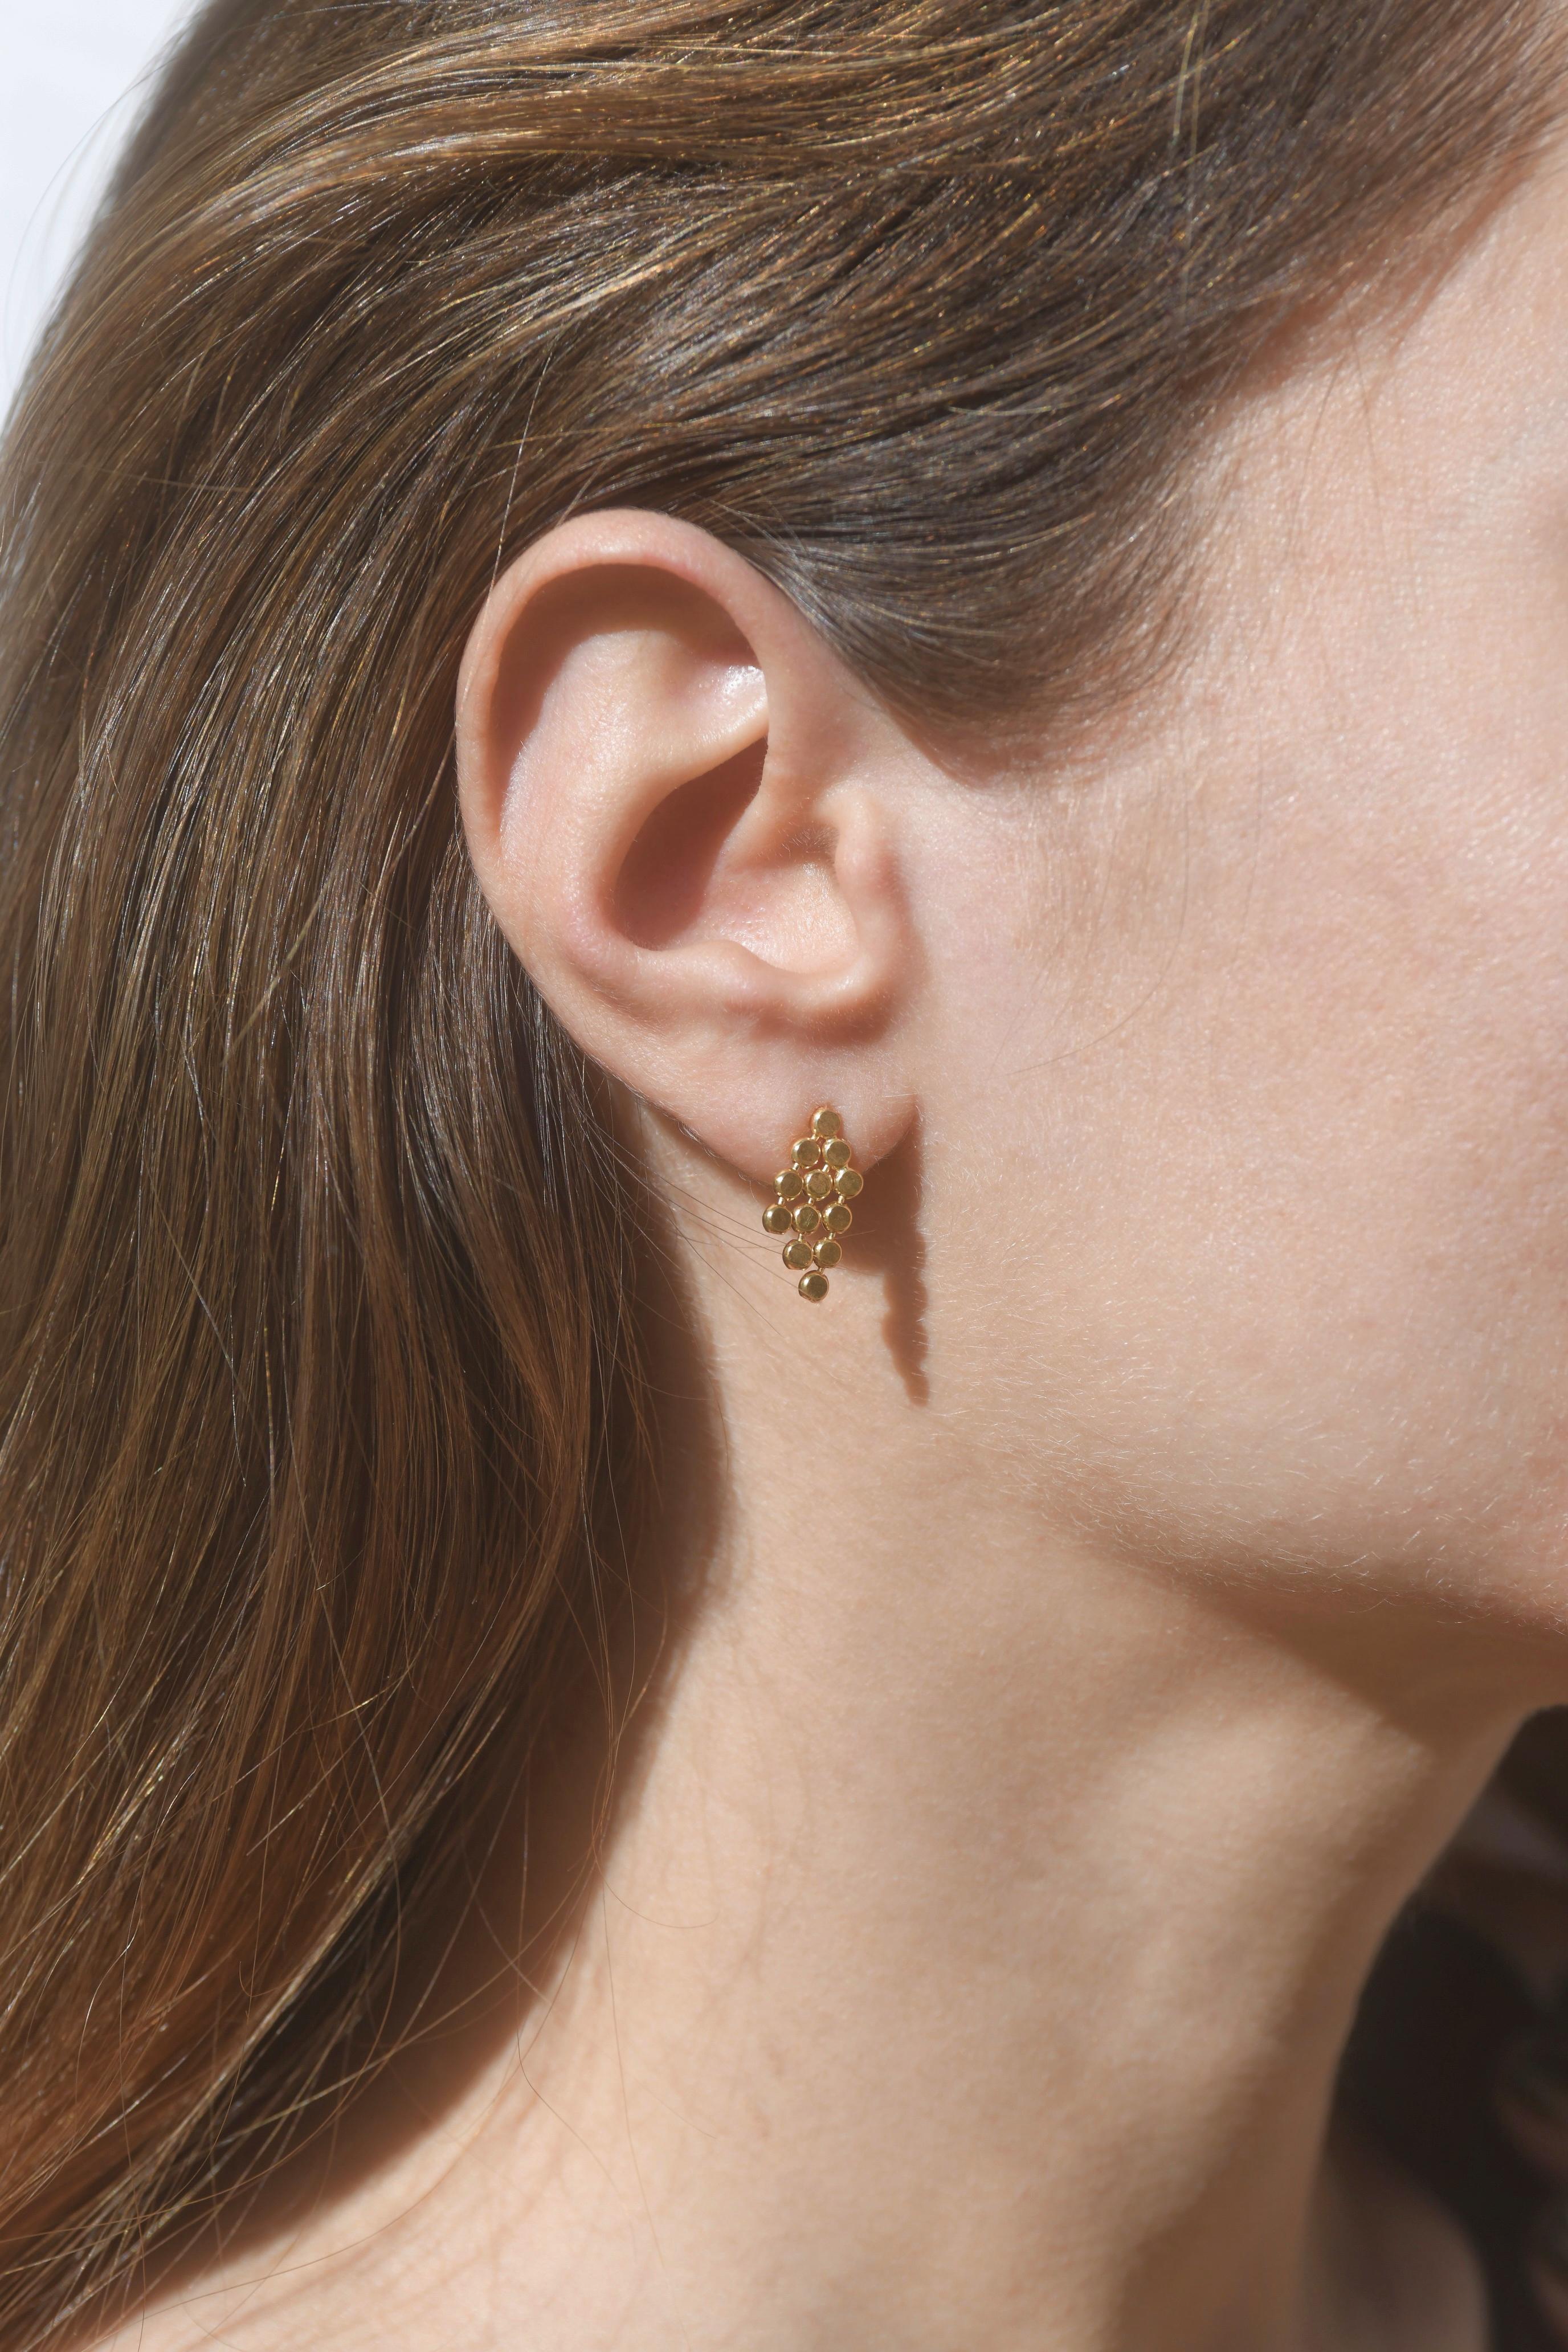 Alegria studs

These lightweight everyday earrings will reflect light and make your face glow up. You won't take them off. 

Hand-crafted by local skilled Greek craftsmen.

All of our earrings have 10 K posts to avoid allergies and handmade backings